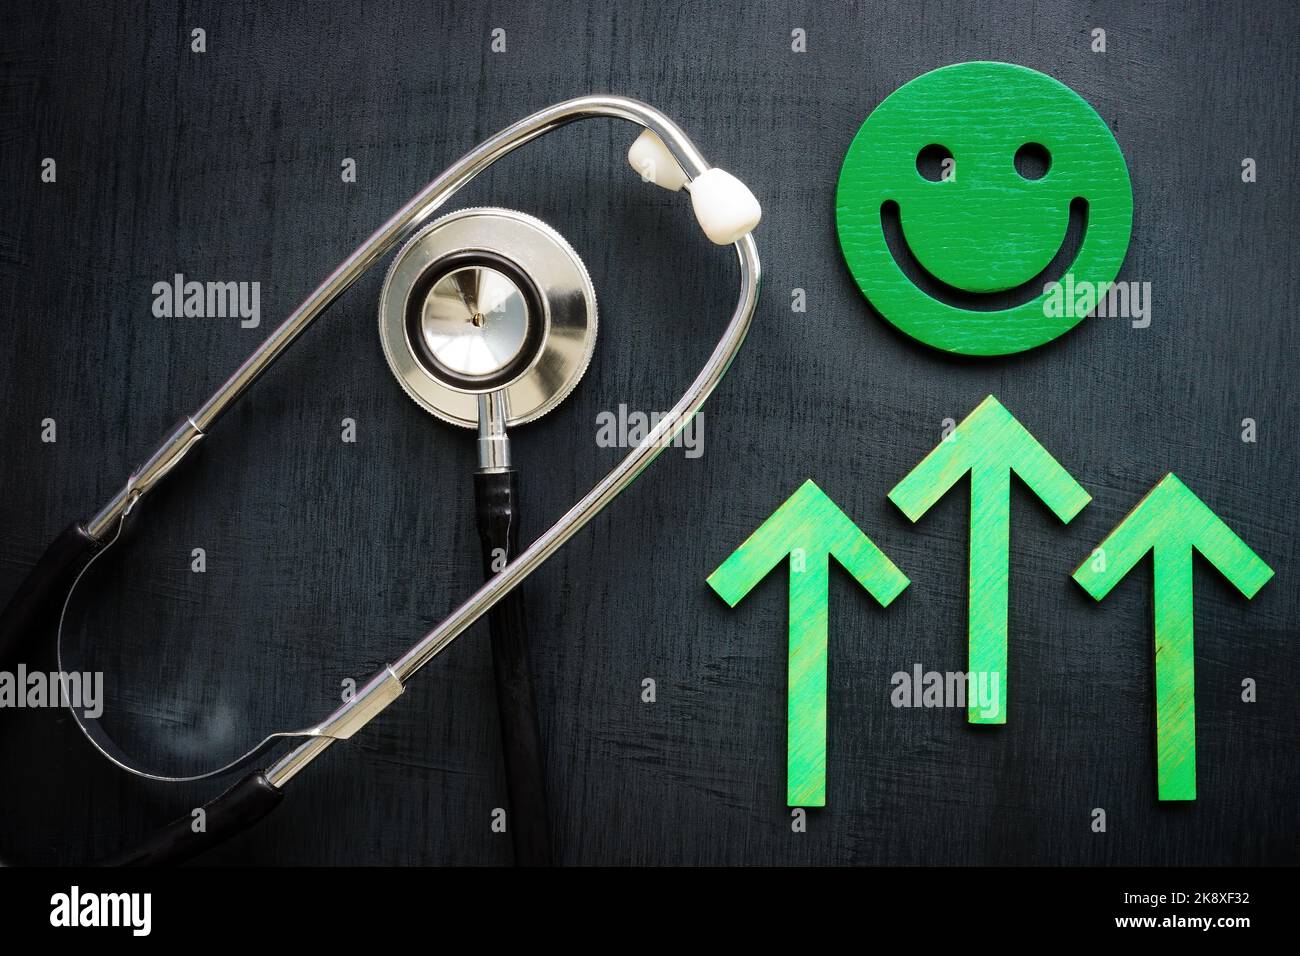 Smiley, green arrows and stethoscope as symbol of patient satisfaction. Stock Photo